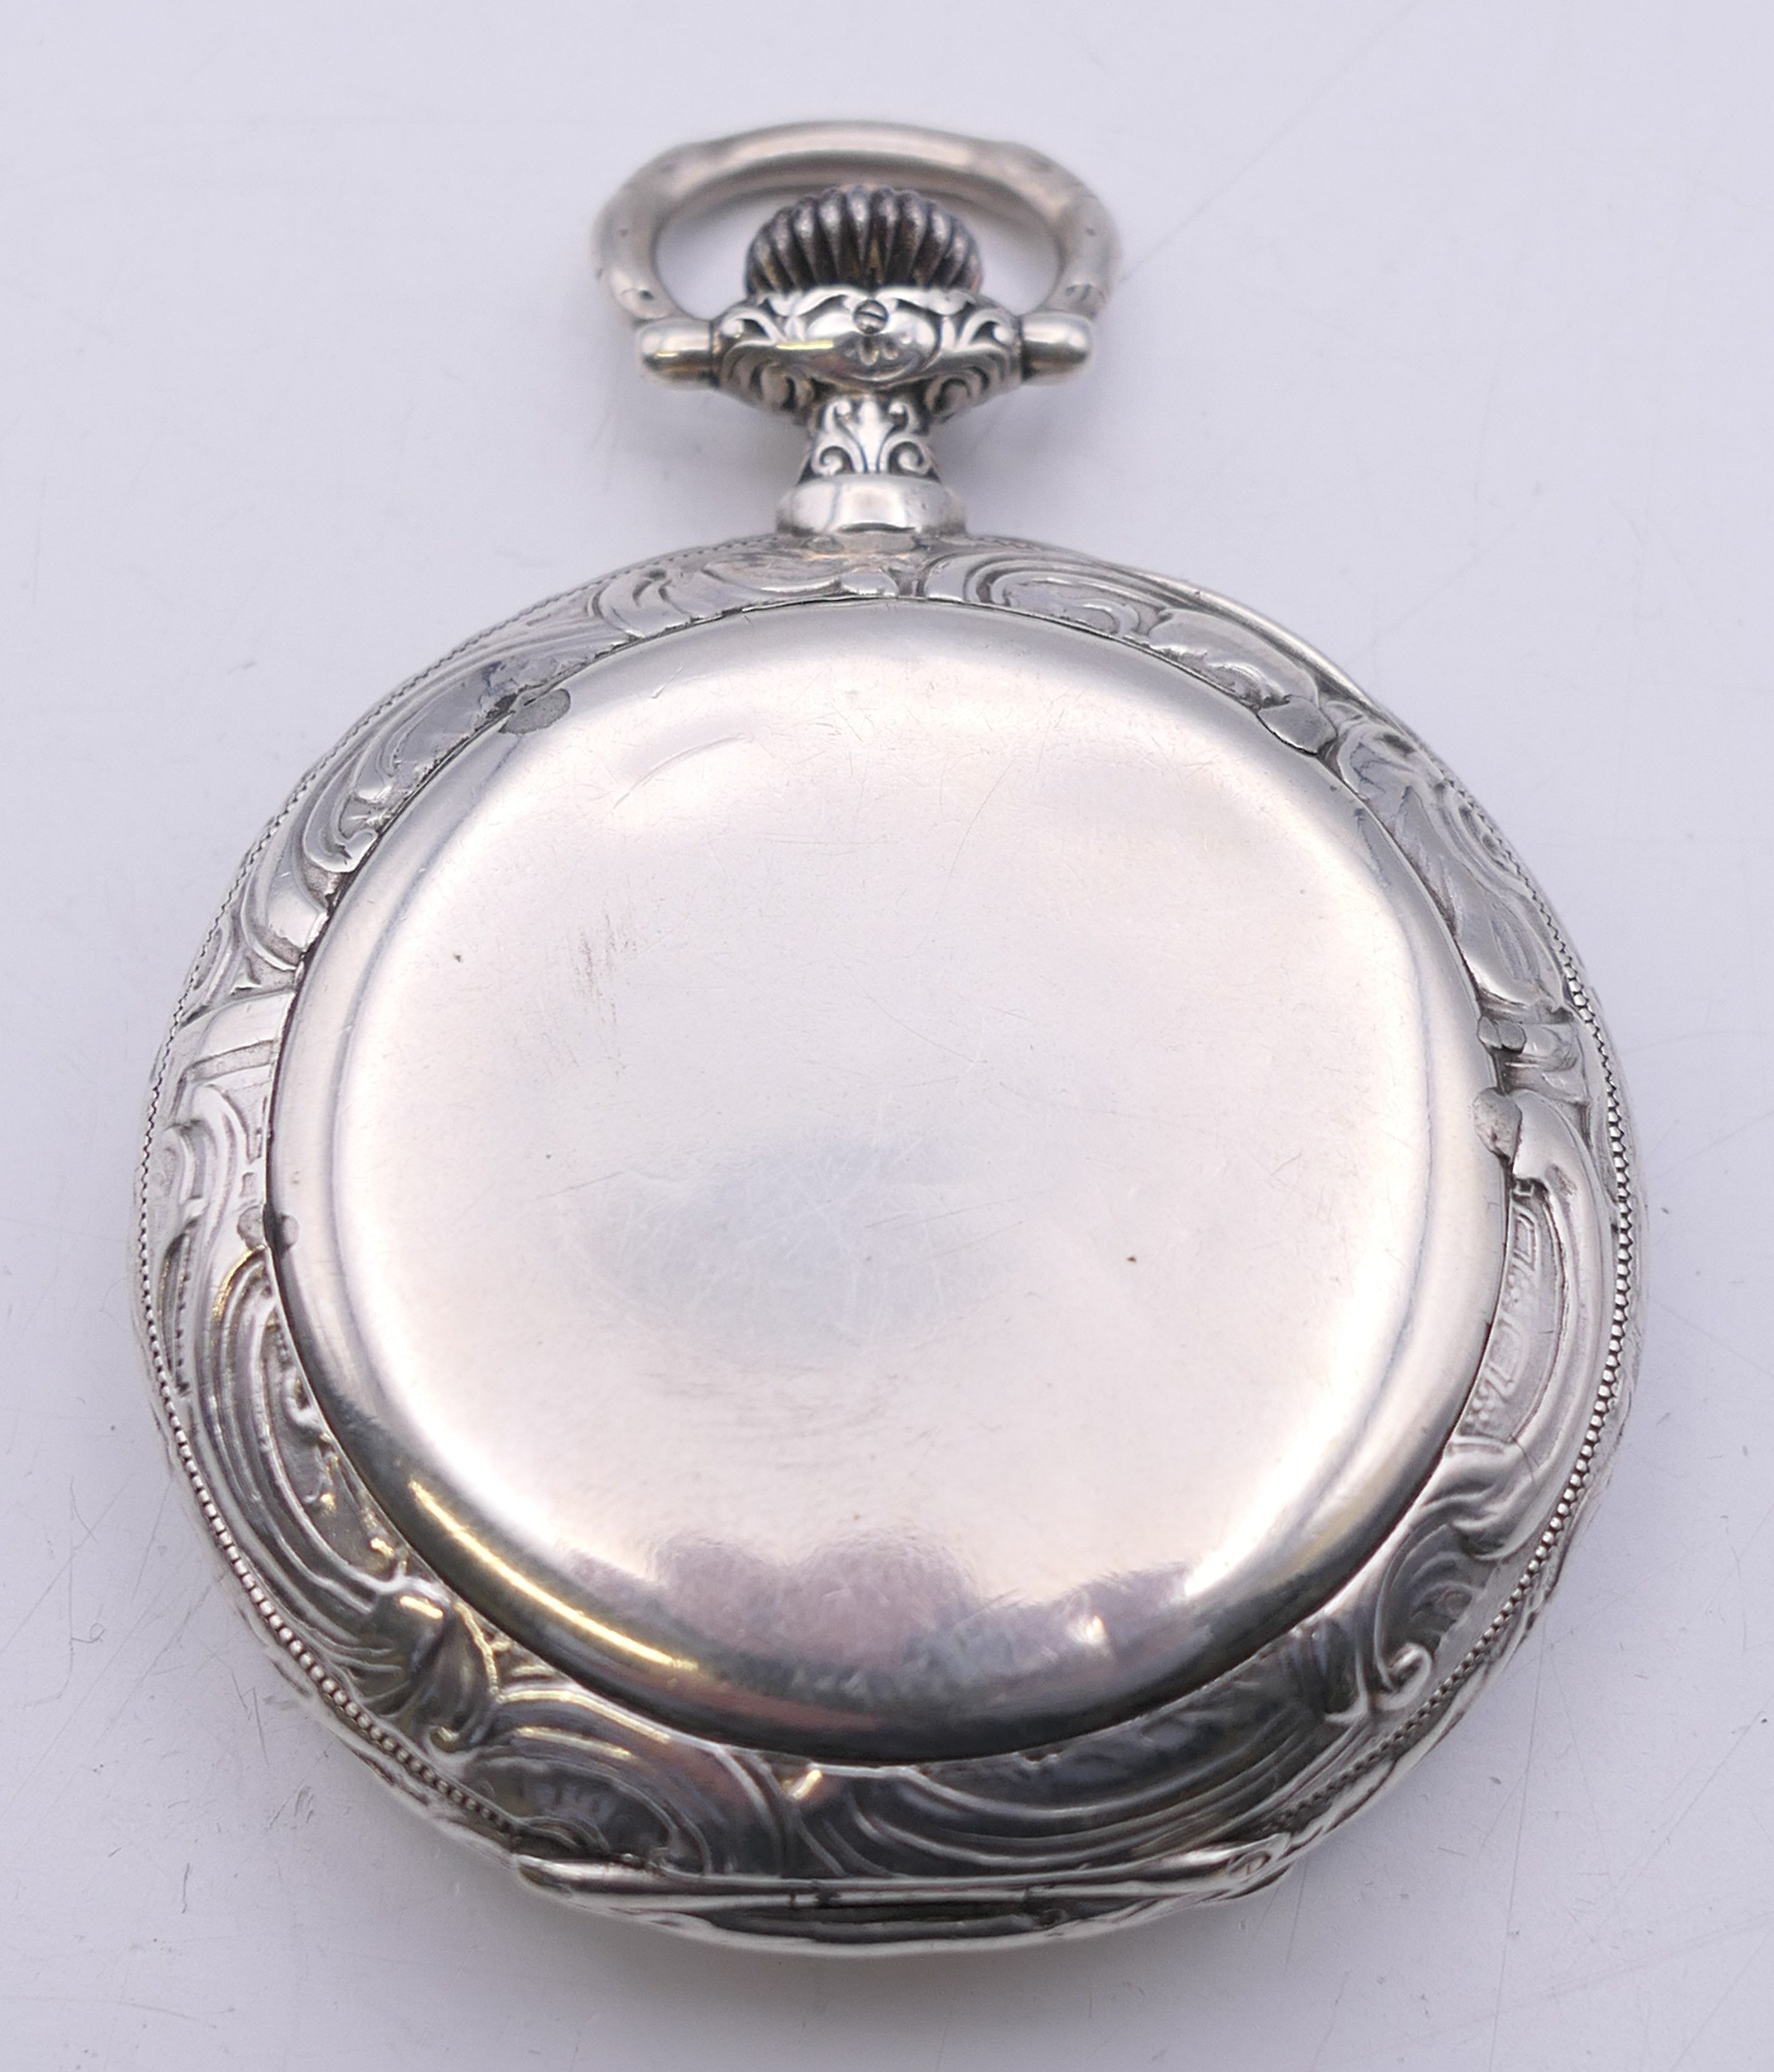 A Swiss Longines Grand Prix Paris 1900 800 silver full hunter pocket watch, serial number 2030641. - Image 2 of 9